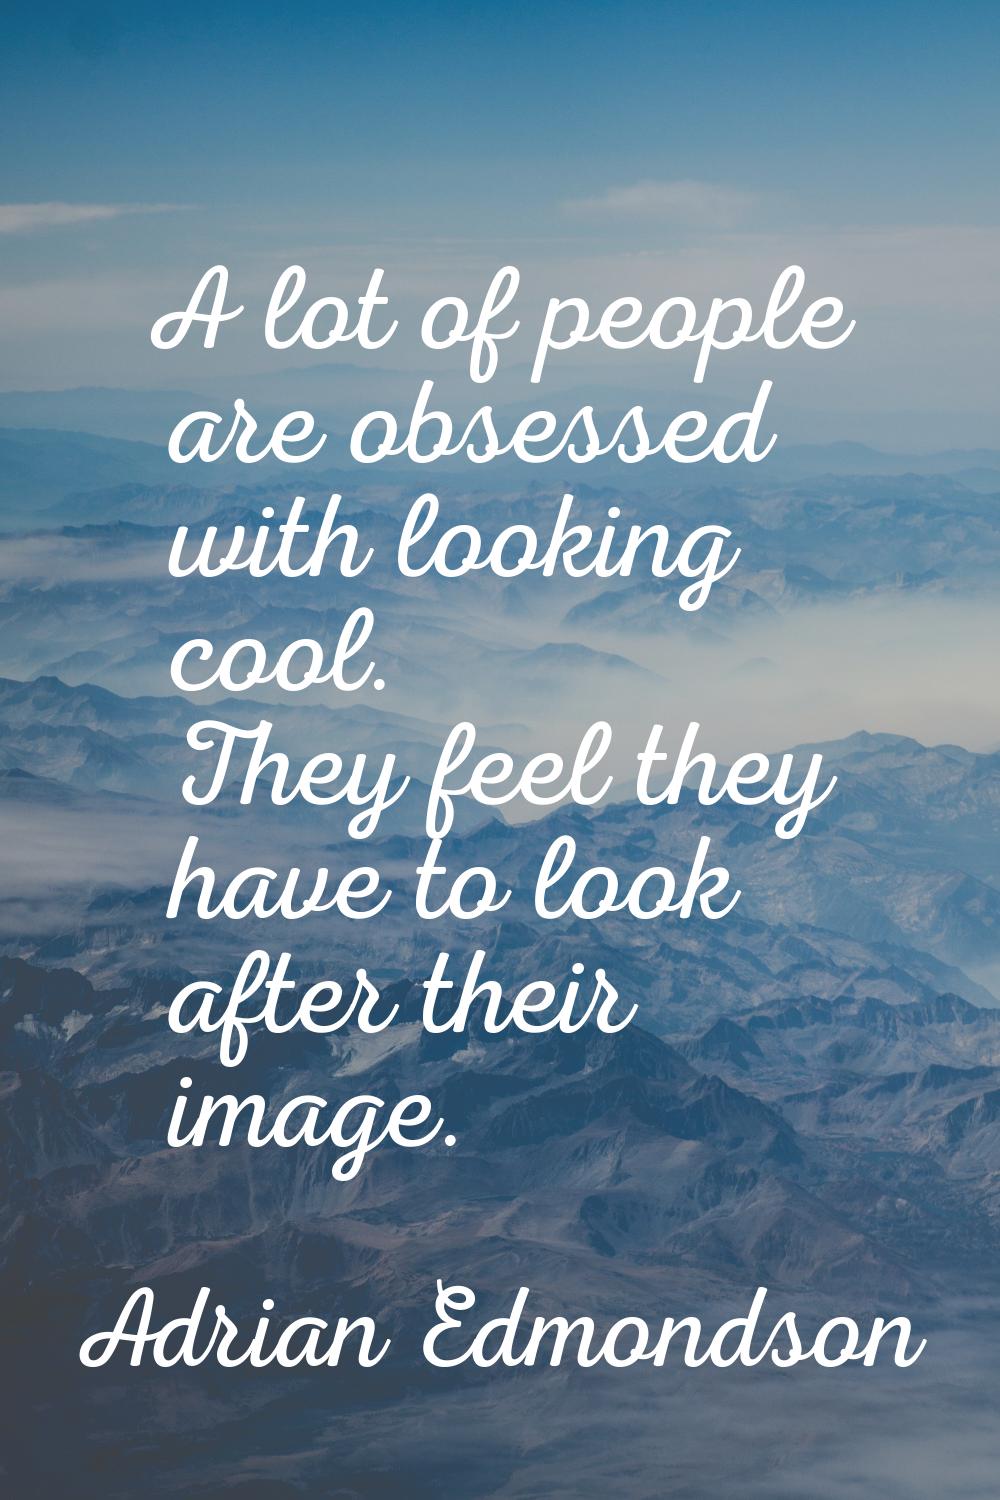 A lot of people are obsessed with looking cool. They feel they have to look after their image.